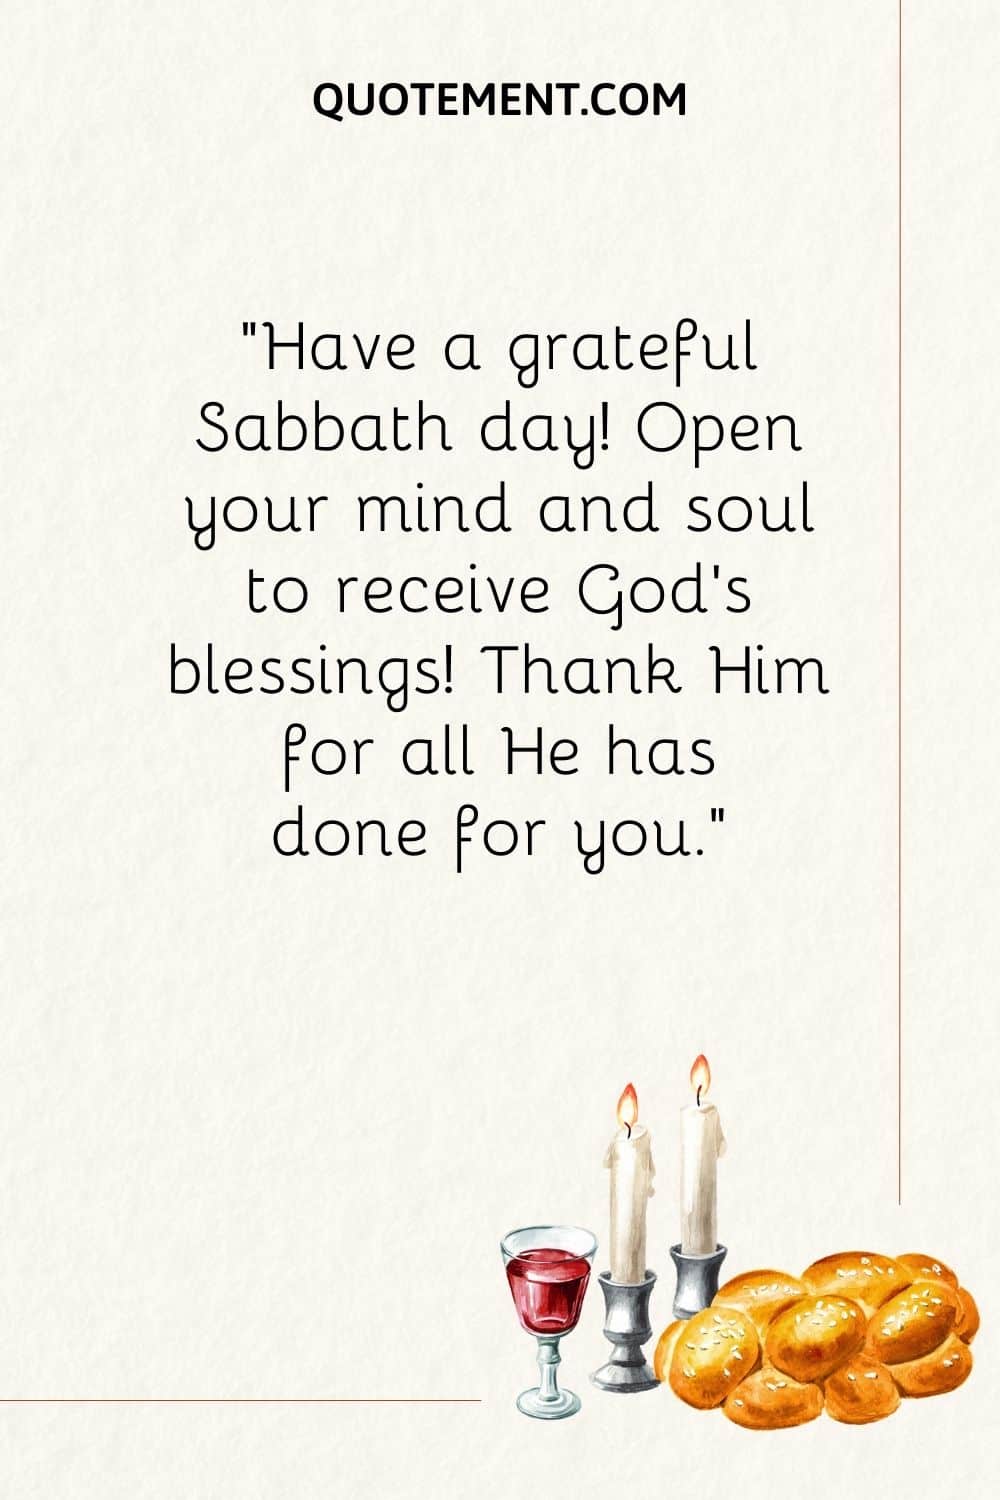 Have a grateful Sabbath day! Open your mind and soul to receive God’s blessings